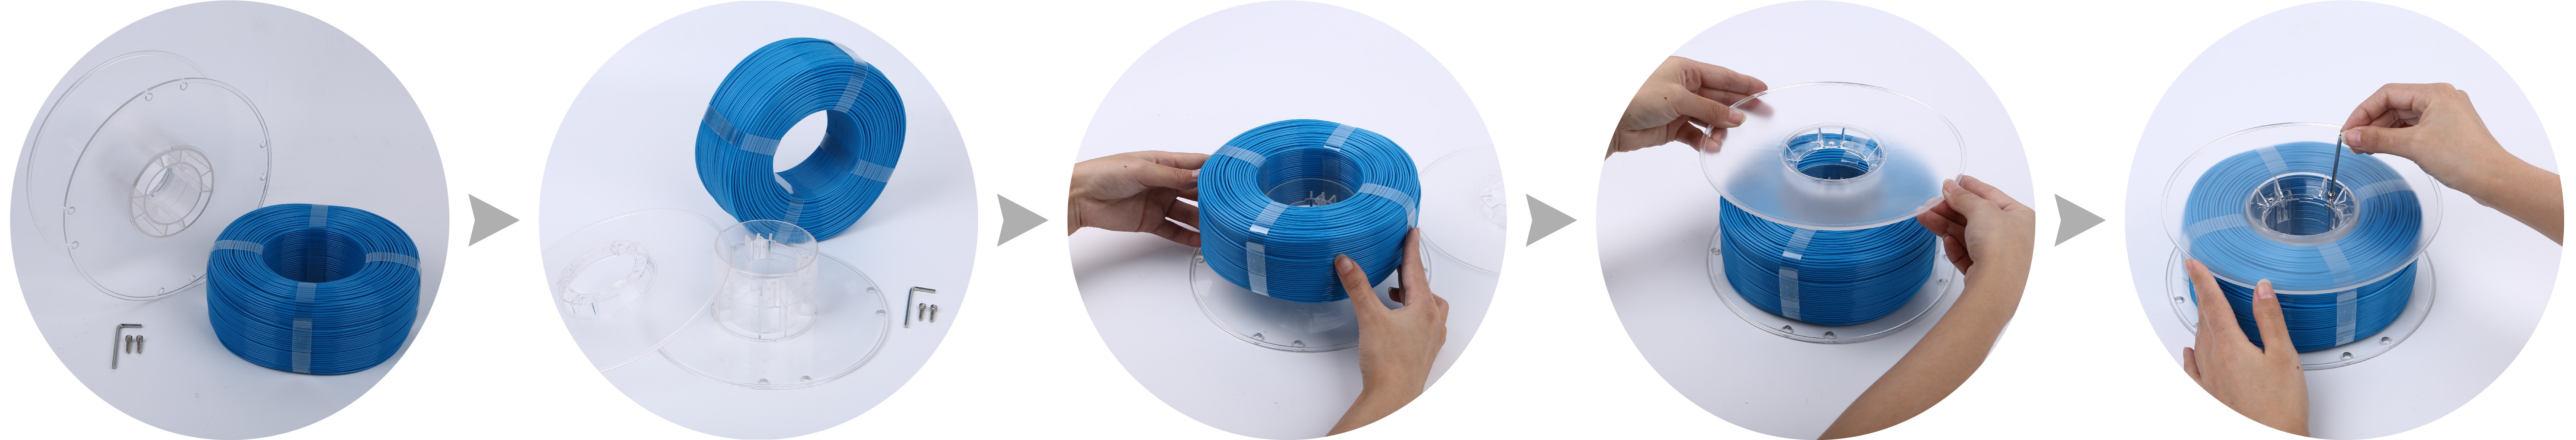 How to respool a standard Print Co. Eco Spool and Refill